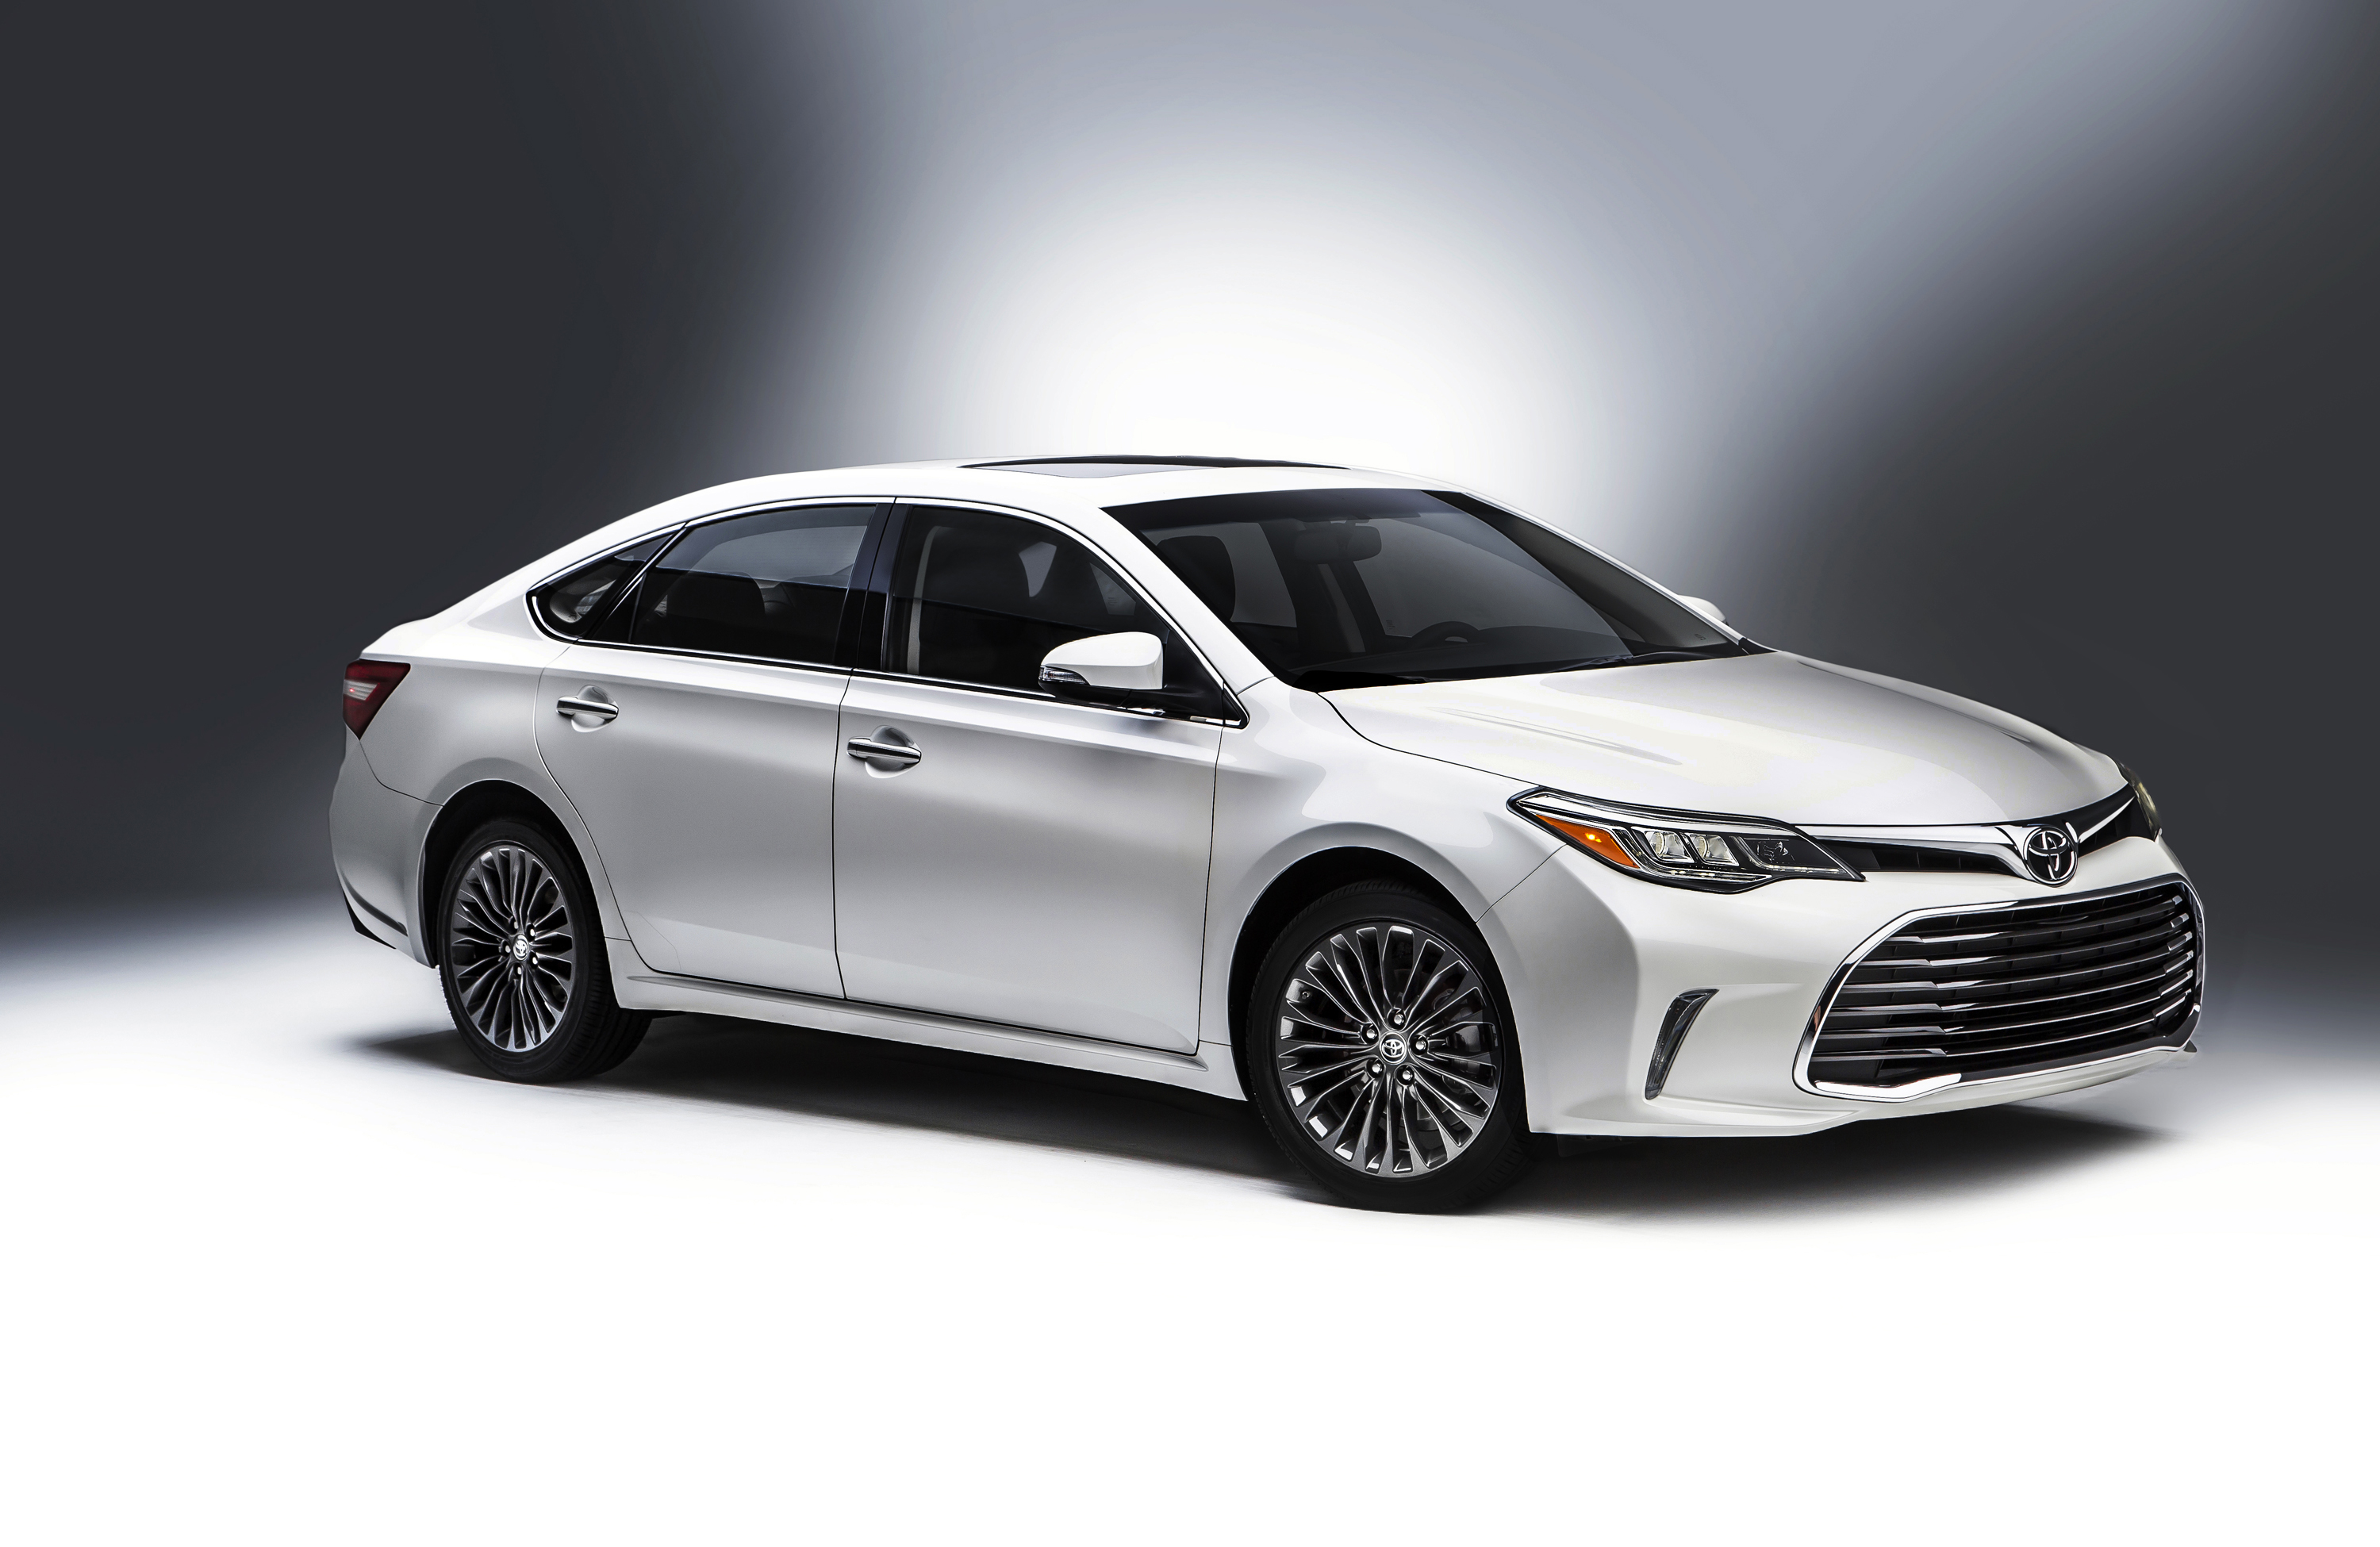 First Look in the 'Second City:' The Refreshed 2016 Toyota Avalon Premium  Mid-Sized Sedan - Toyota USA Newsroom